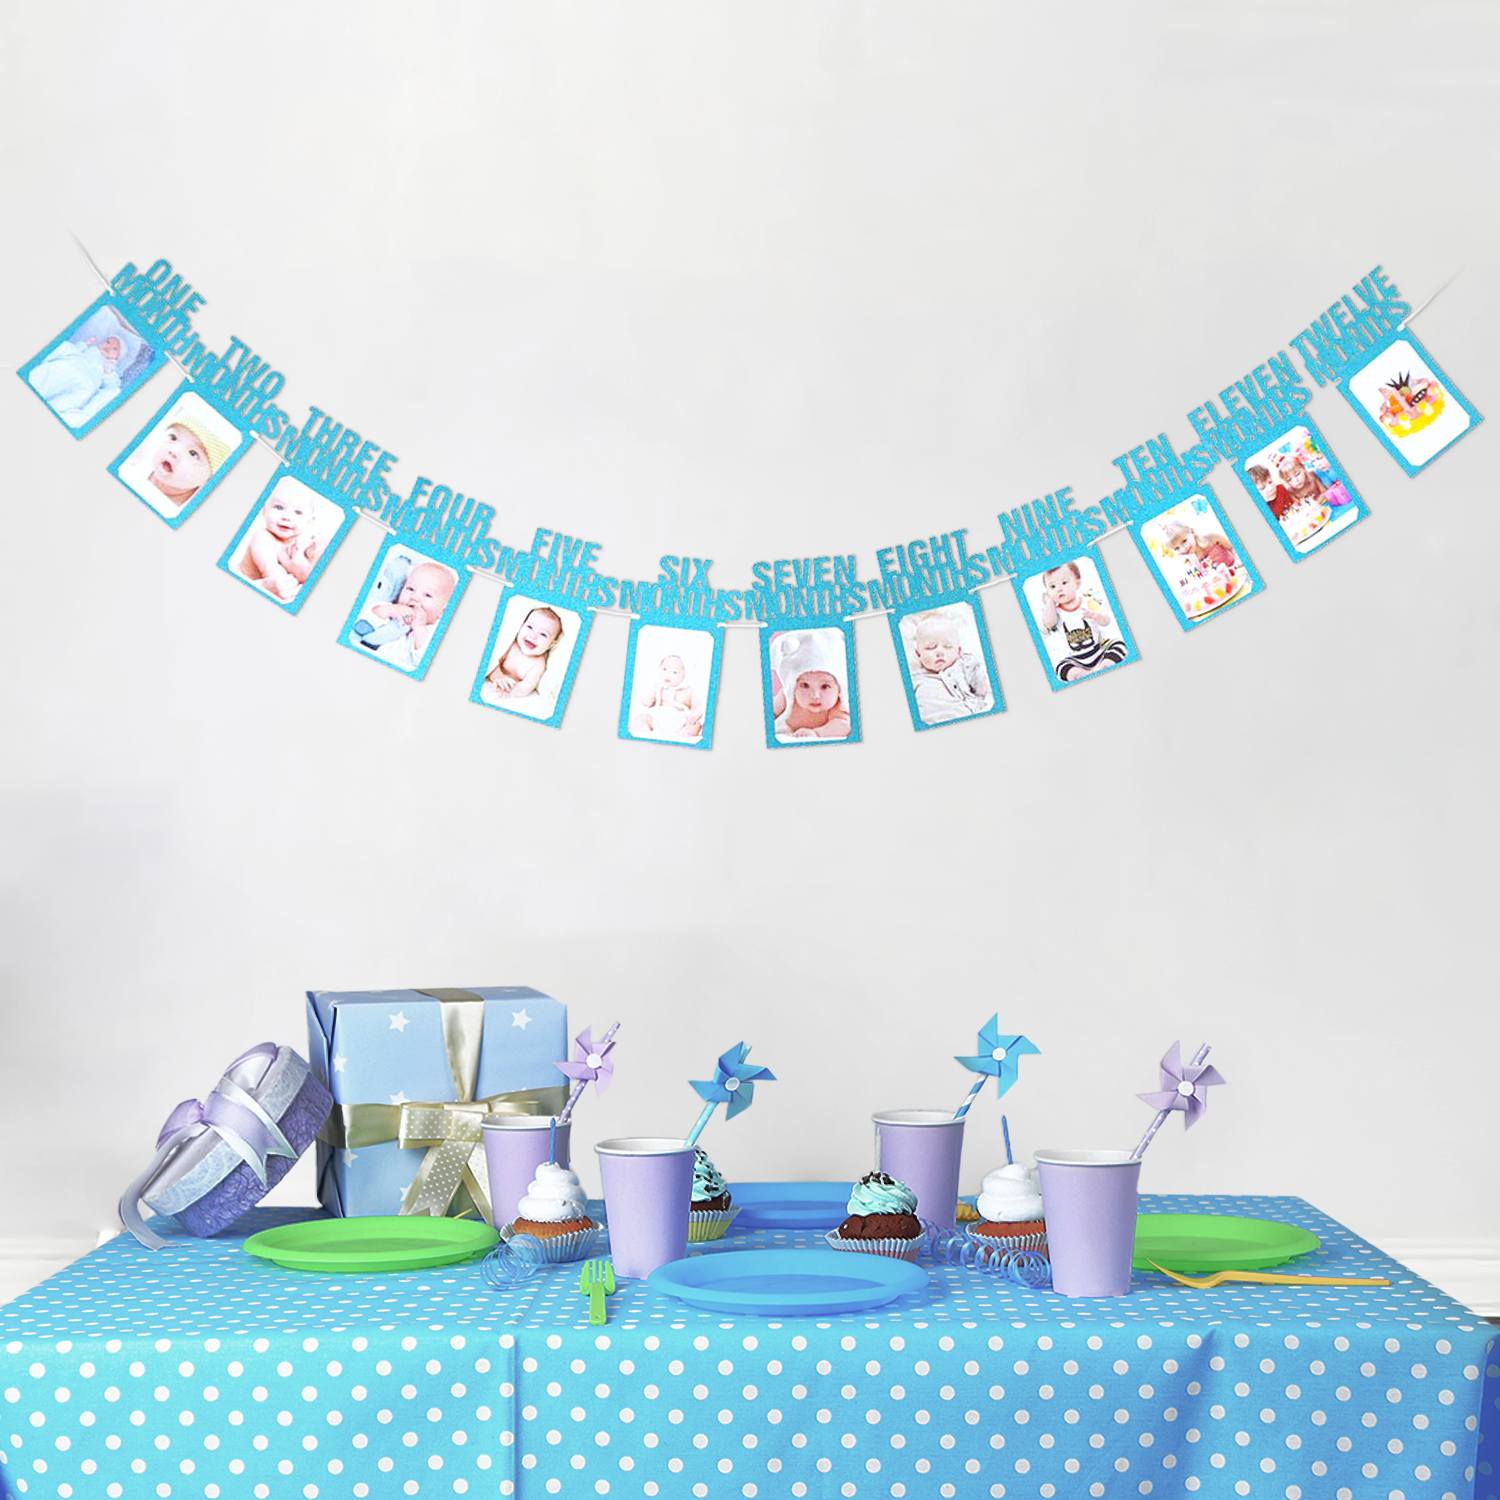 Buy SpecialYou.in Half Birthday Decoration Items for Baby Boy with